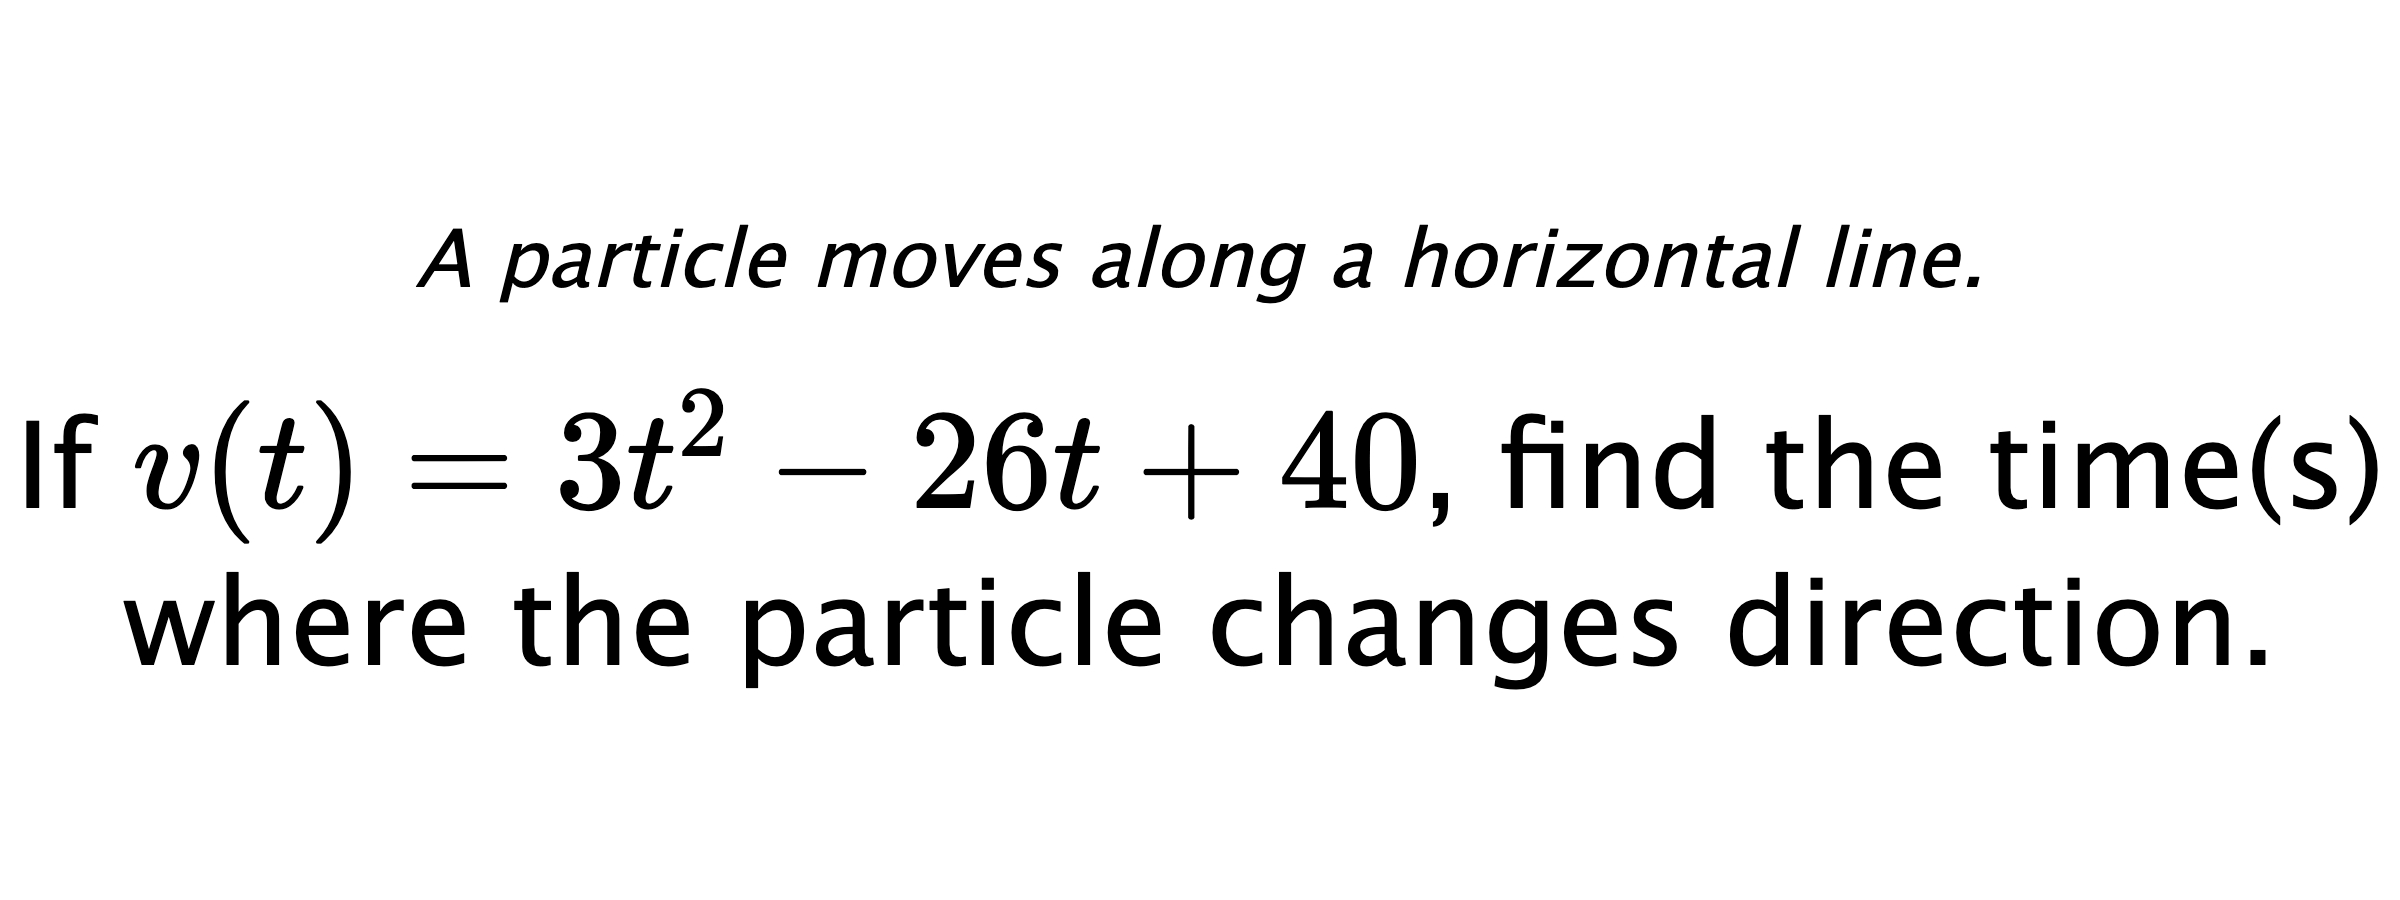 A particle moves along a horizontal line. If $ v(t)=3t^2-26t+40 $, find the time(s) where the particle changes direction.